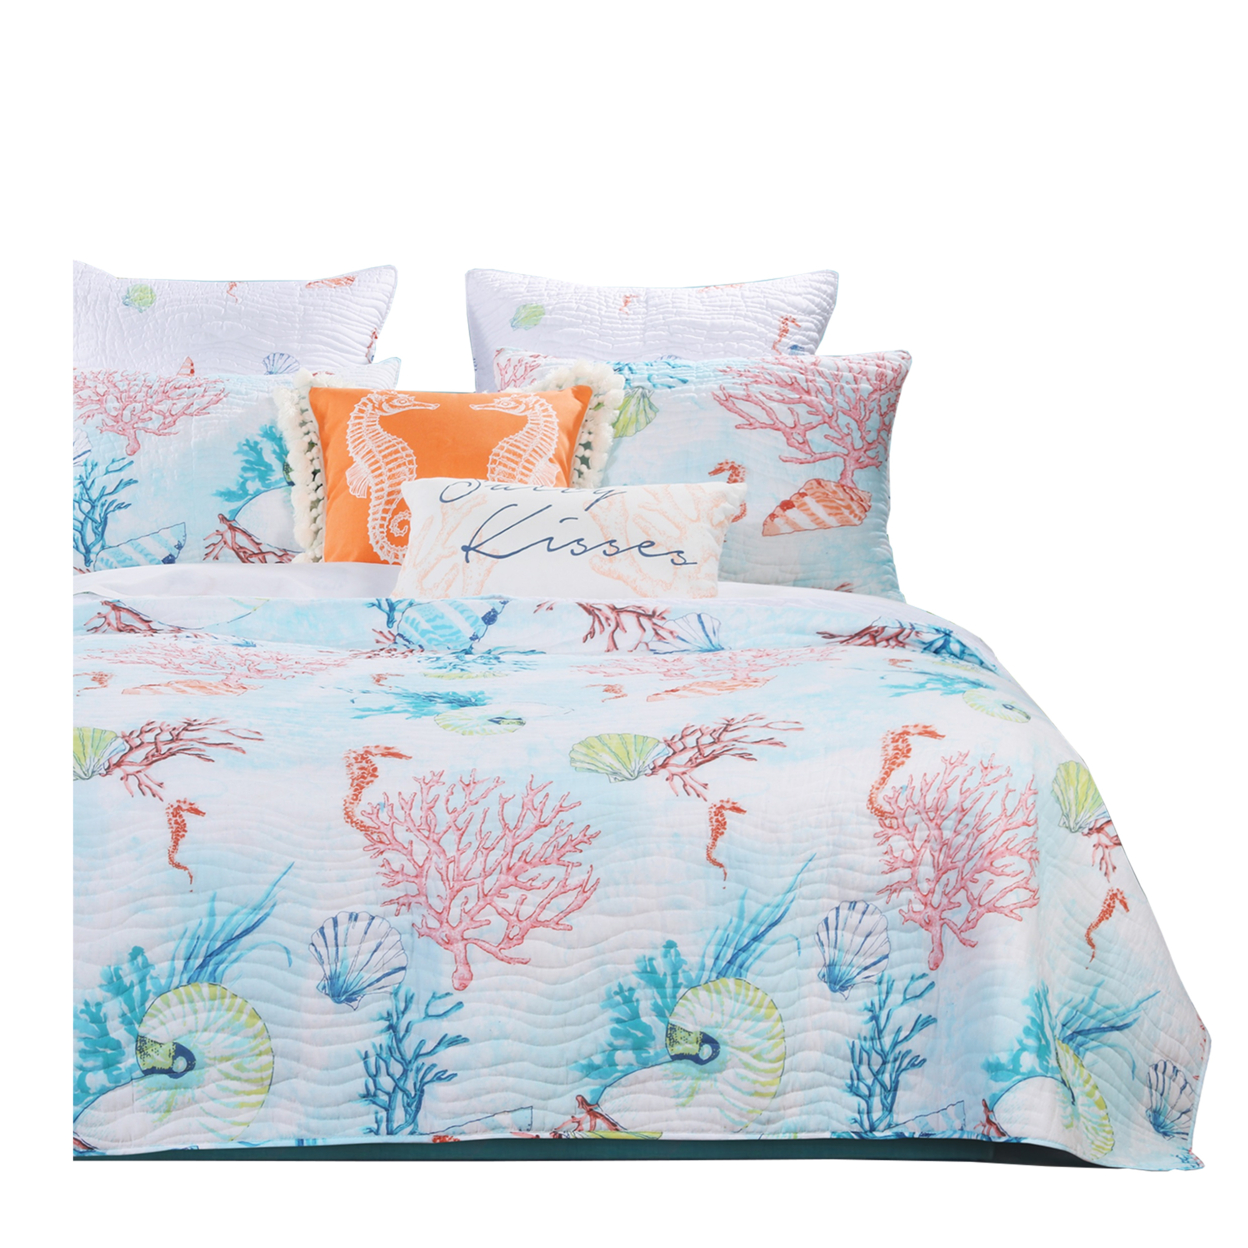 Full Size 3 Piece Polyester Quilt Set With Coral Prints, Multicolor- Saltoro Sherpi